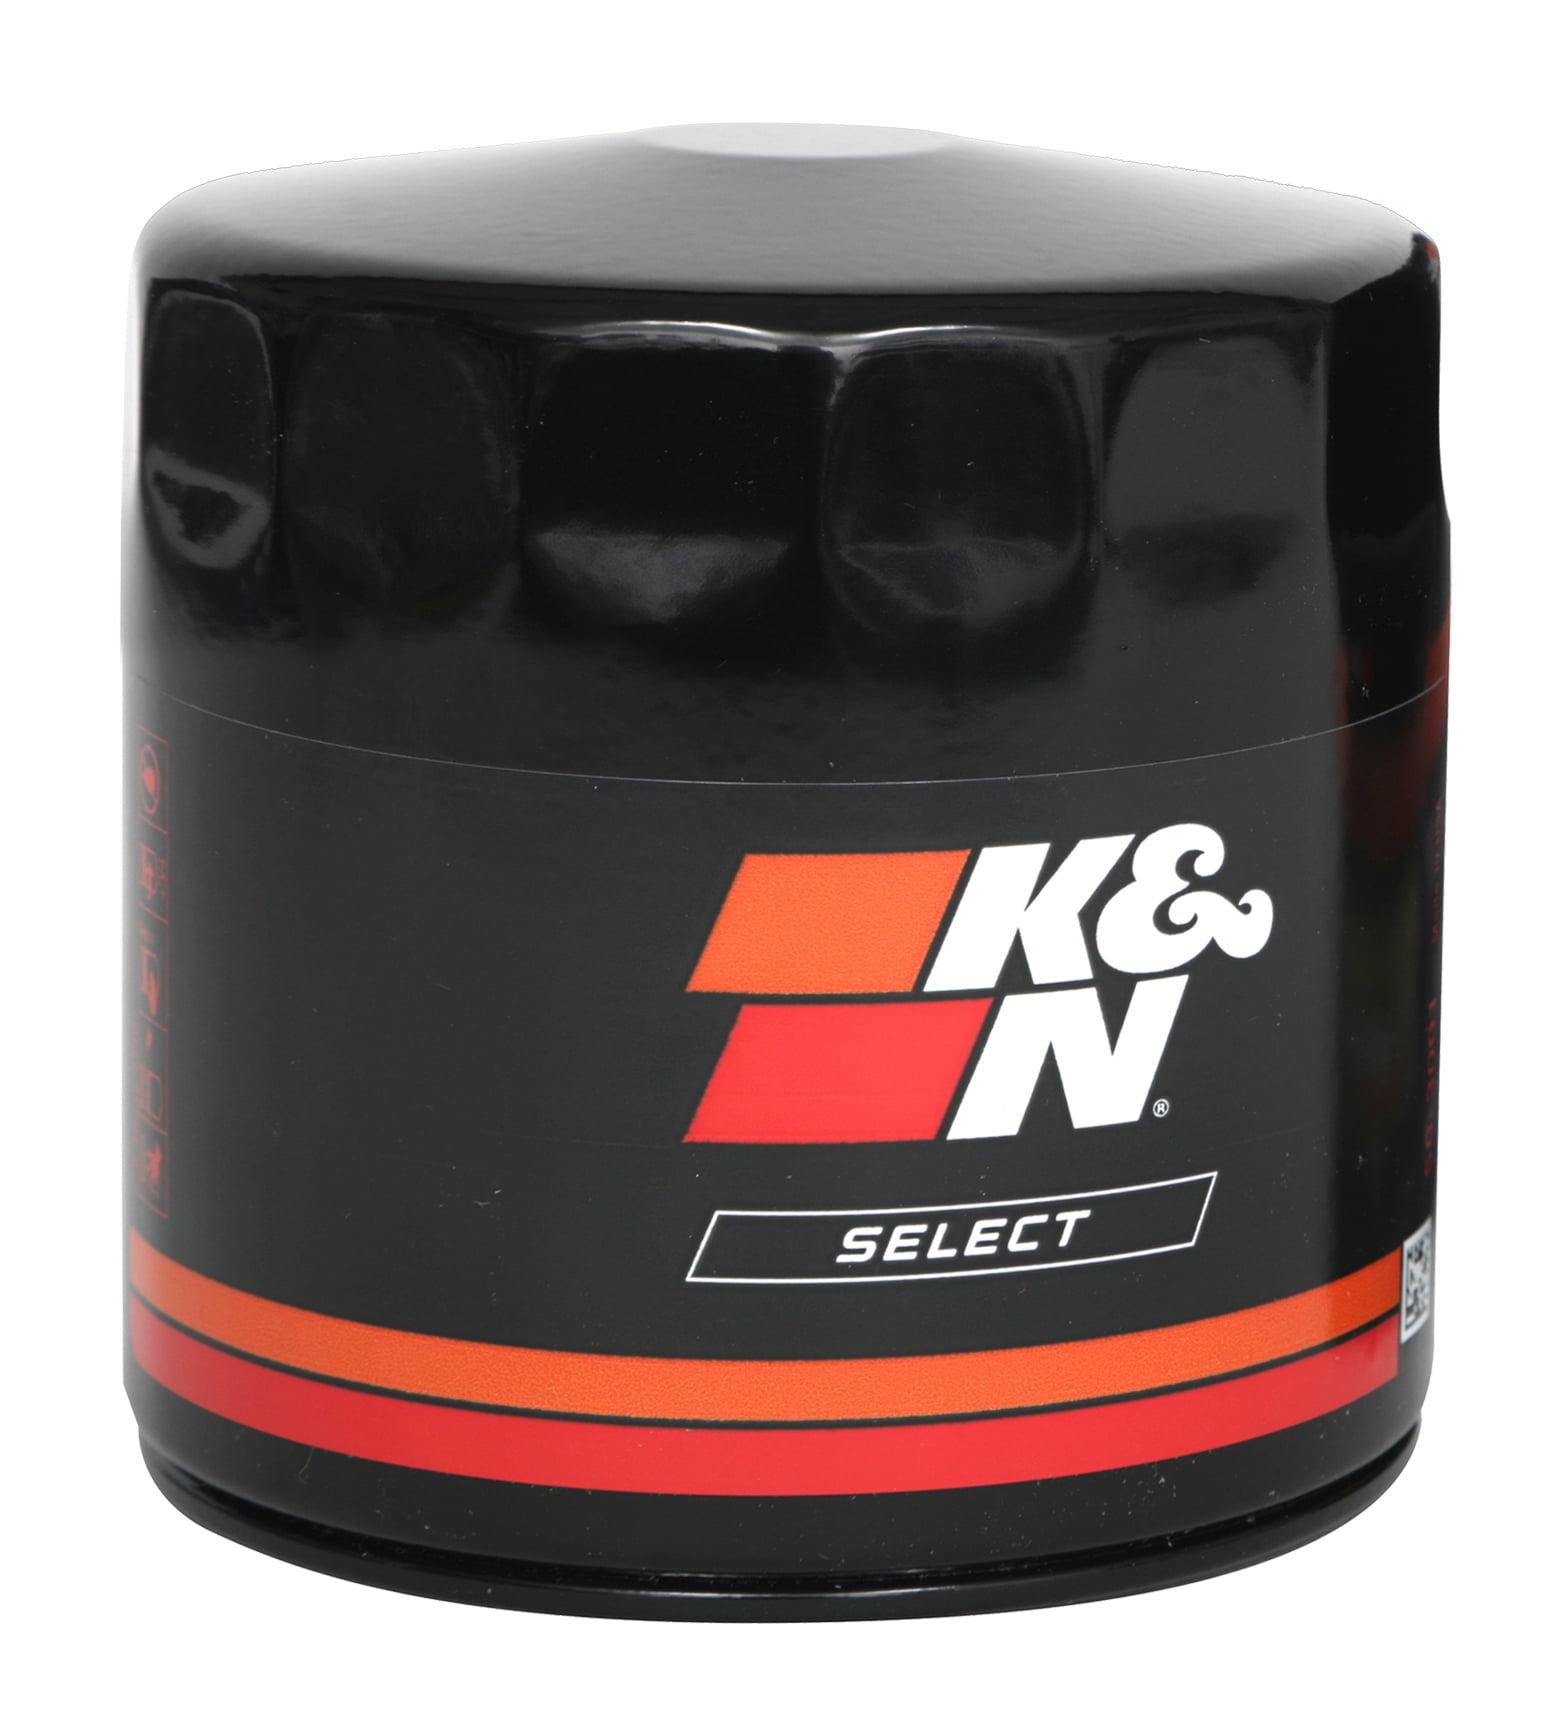 K&N Select Oil Filter SO-1008, Designed to Protect your Engine: Fits Select INFINITI/MAZDA/NISSAN/SUBARU Vehicle Models